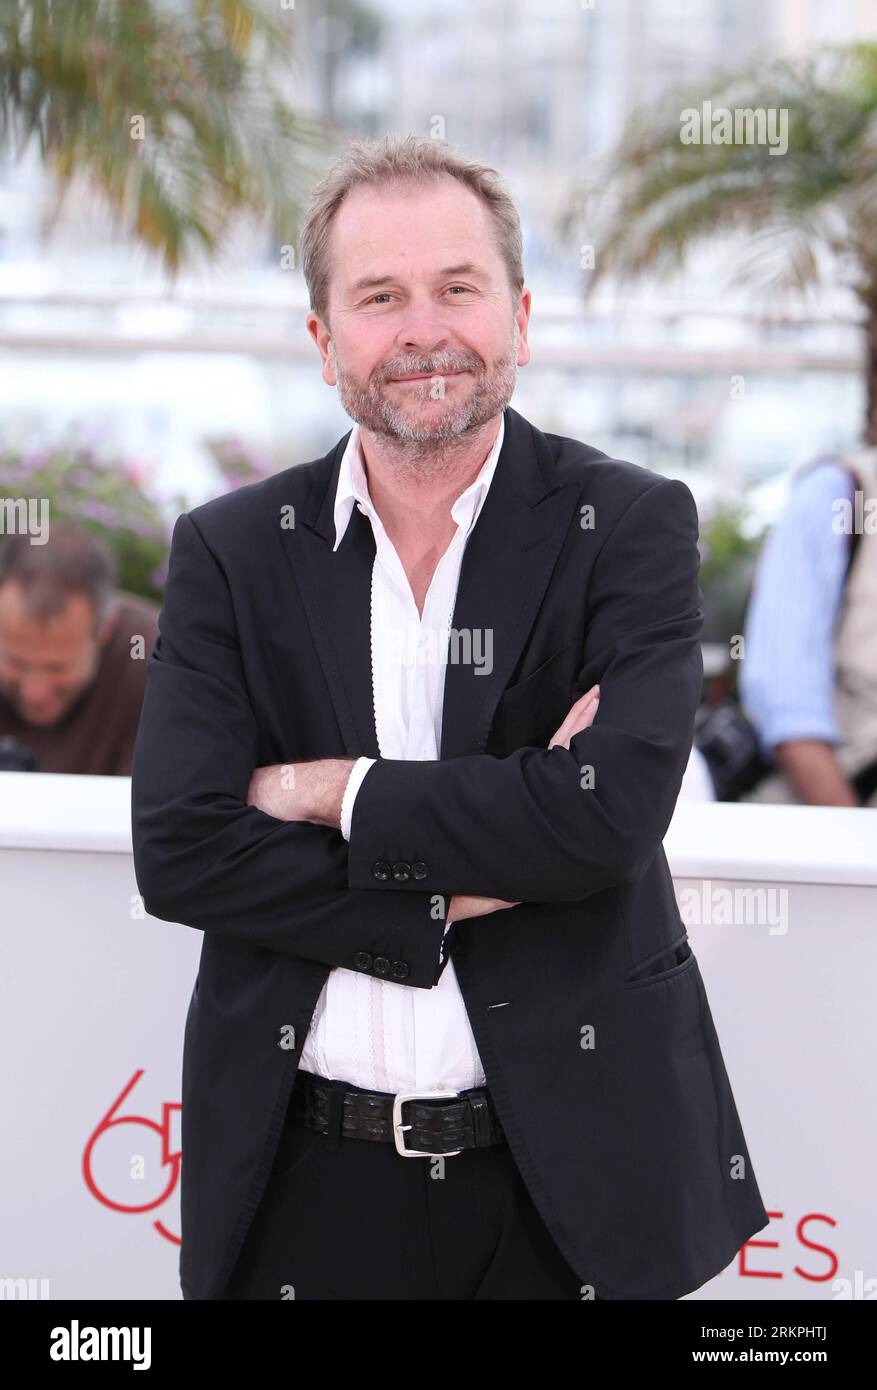 (120518) -- CANNES, May 18, 2012 (Xinhua) -- Austrian director Ulrich Seidl poses for photos during a photocall for Austrian film Paradies:Liebe at the 65th Cannes Film Festival, southern France, on May 18, 2012. Paradies: Liebe will compete with the other 21 feature films for 2012 Golden Palm (Palme d Or), the most prestigious award of the 65th Cannes International Film Festival. (Xinhua/Gao Jing) (zjl) FRANCE-CANNES-FILM FESTIVAL-PHOTOCALL-PARADIES:LIEBE PUBLICATIONxNOTxINxCHN Stock Photo